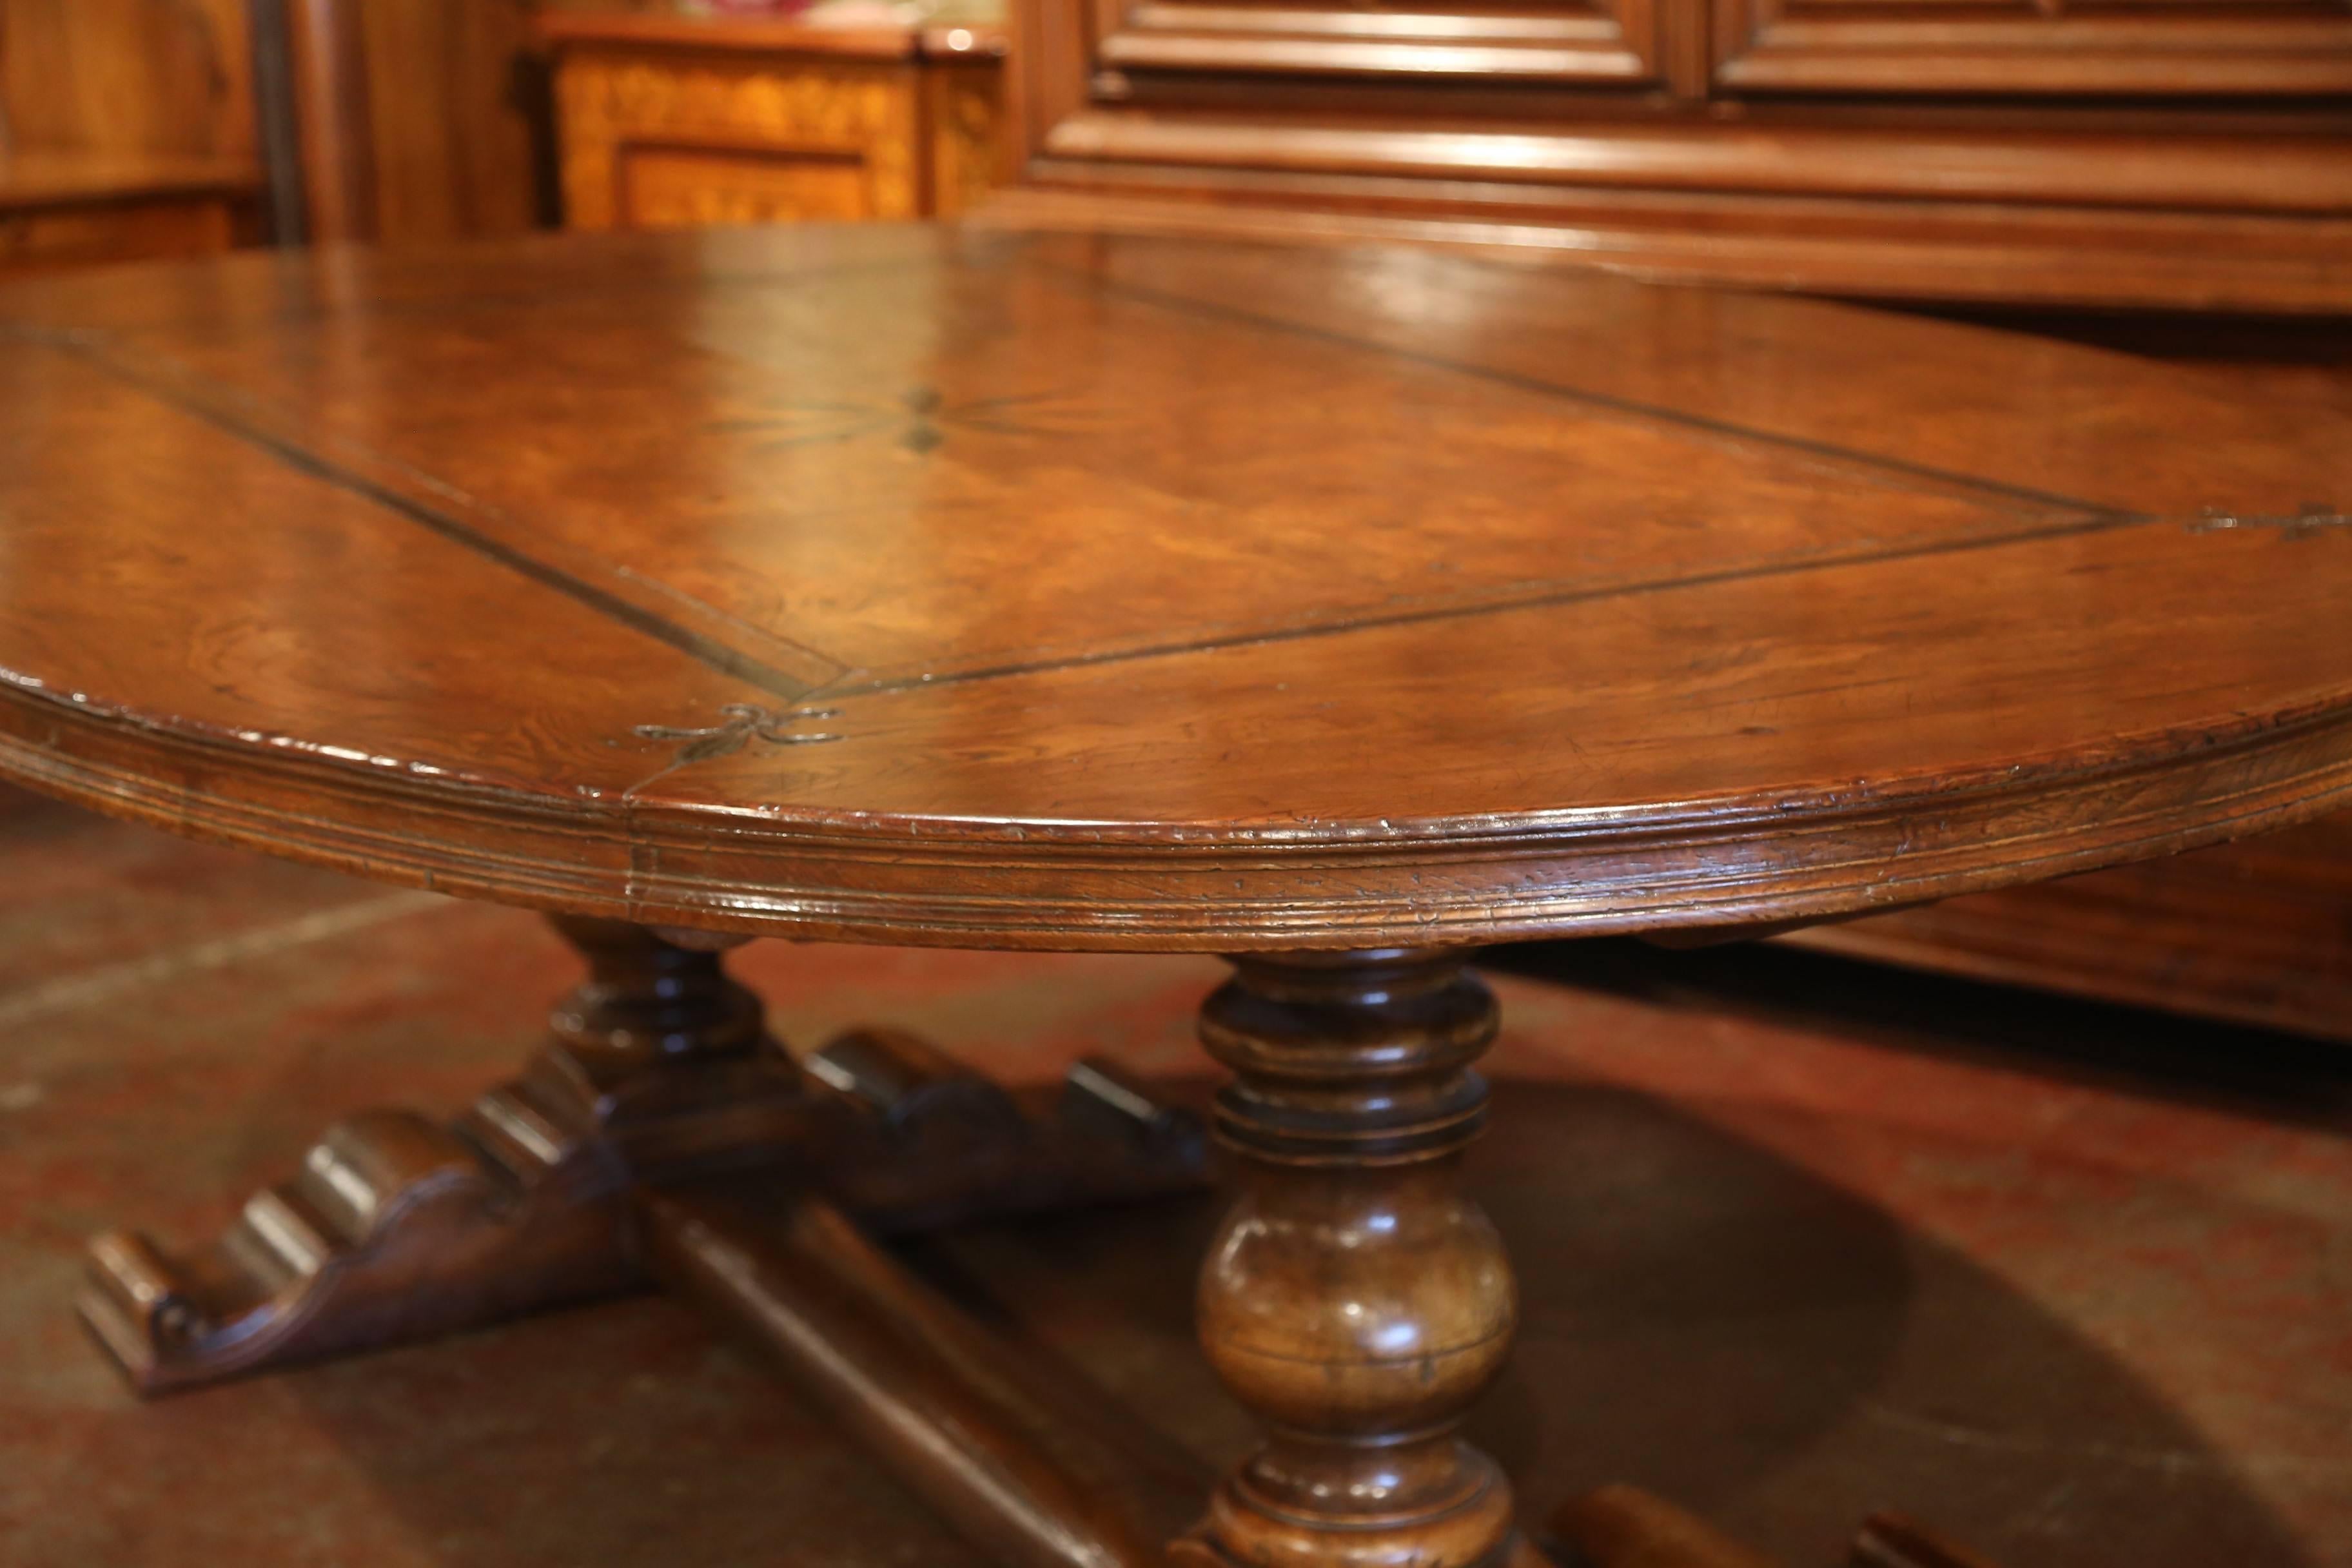 Late 20th Century French Walnut and Chestnut Oval Trestle Dining Room Table with Inlay Decor